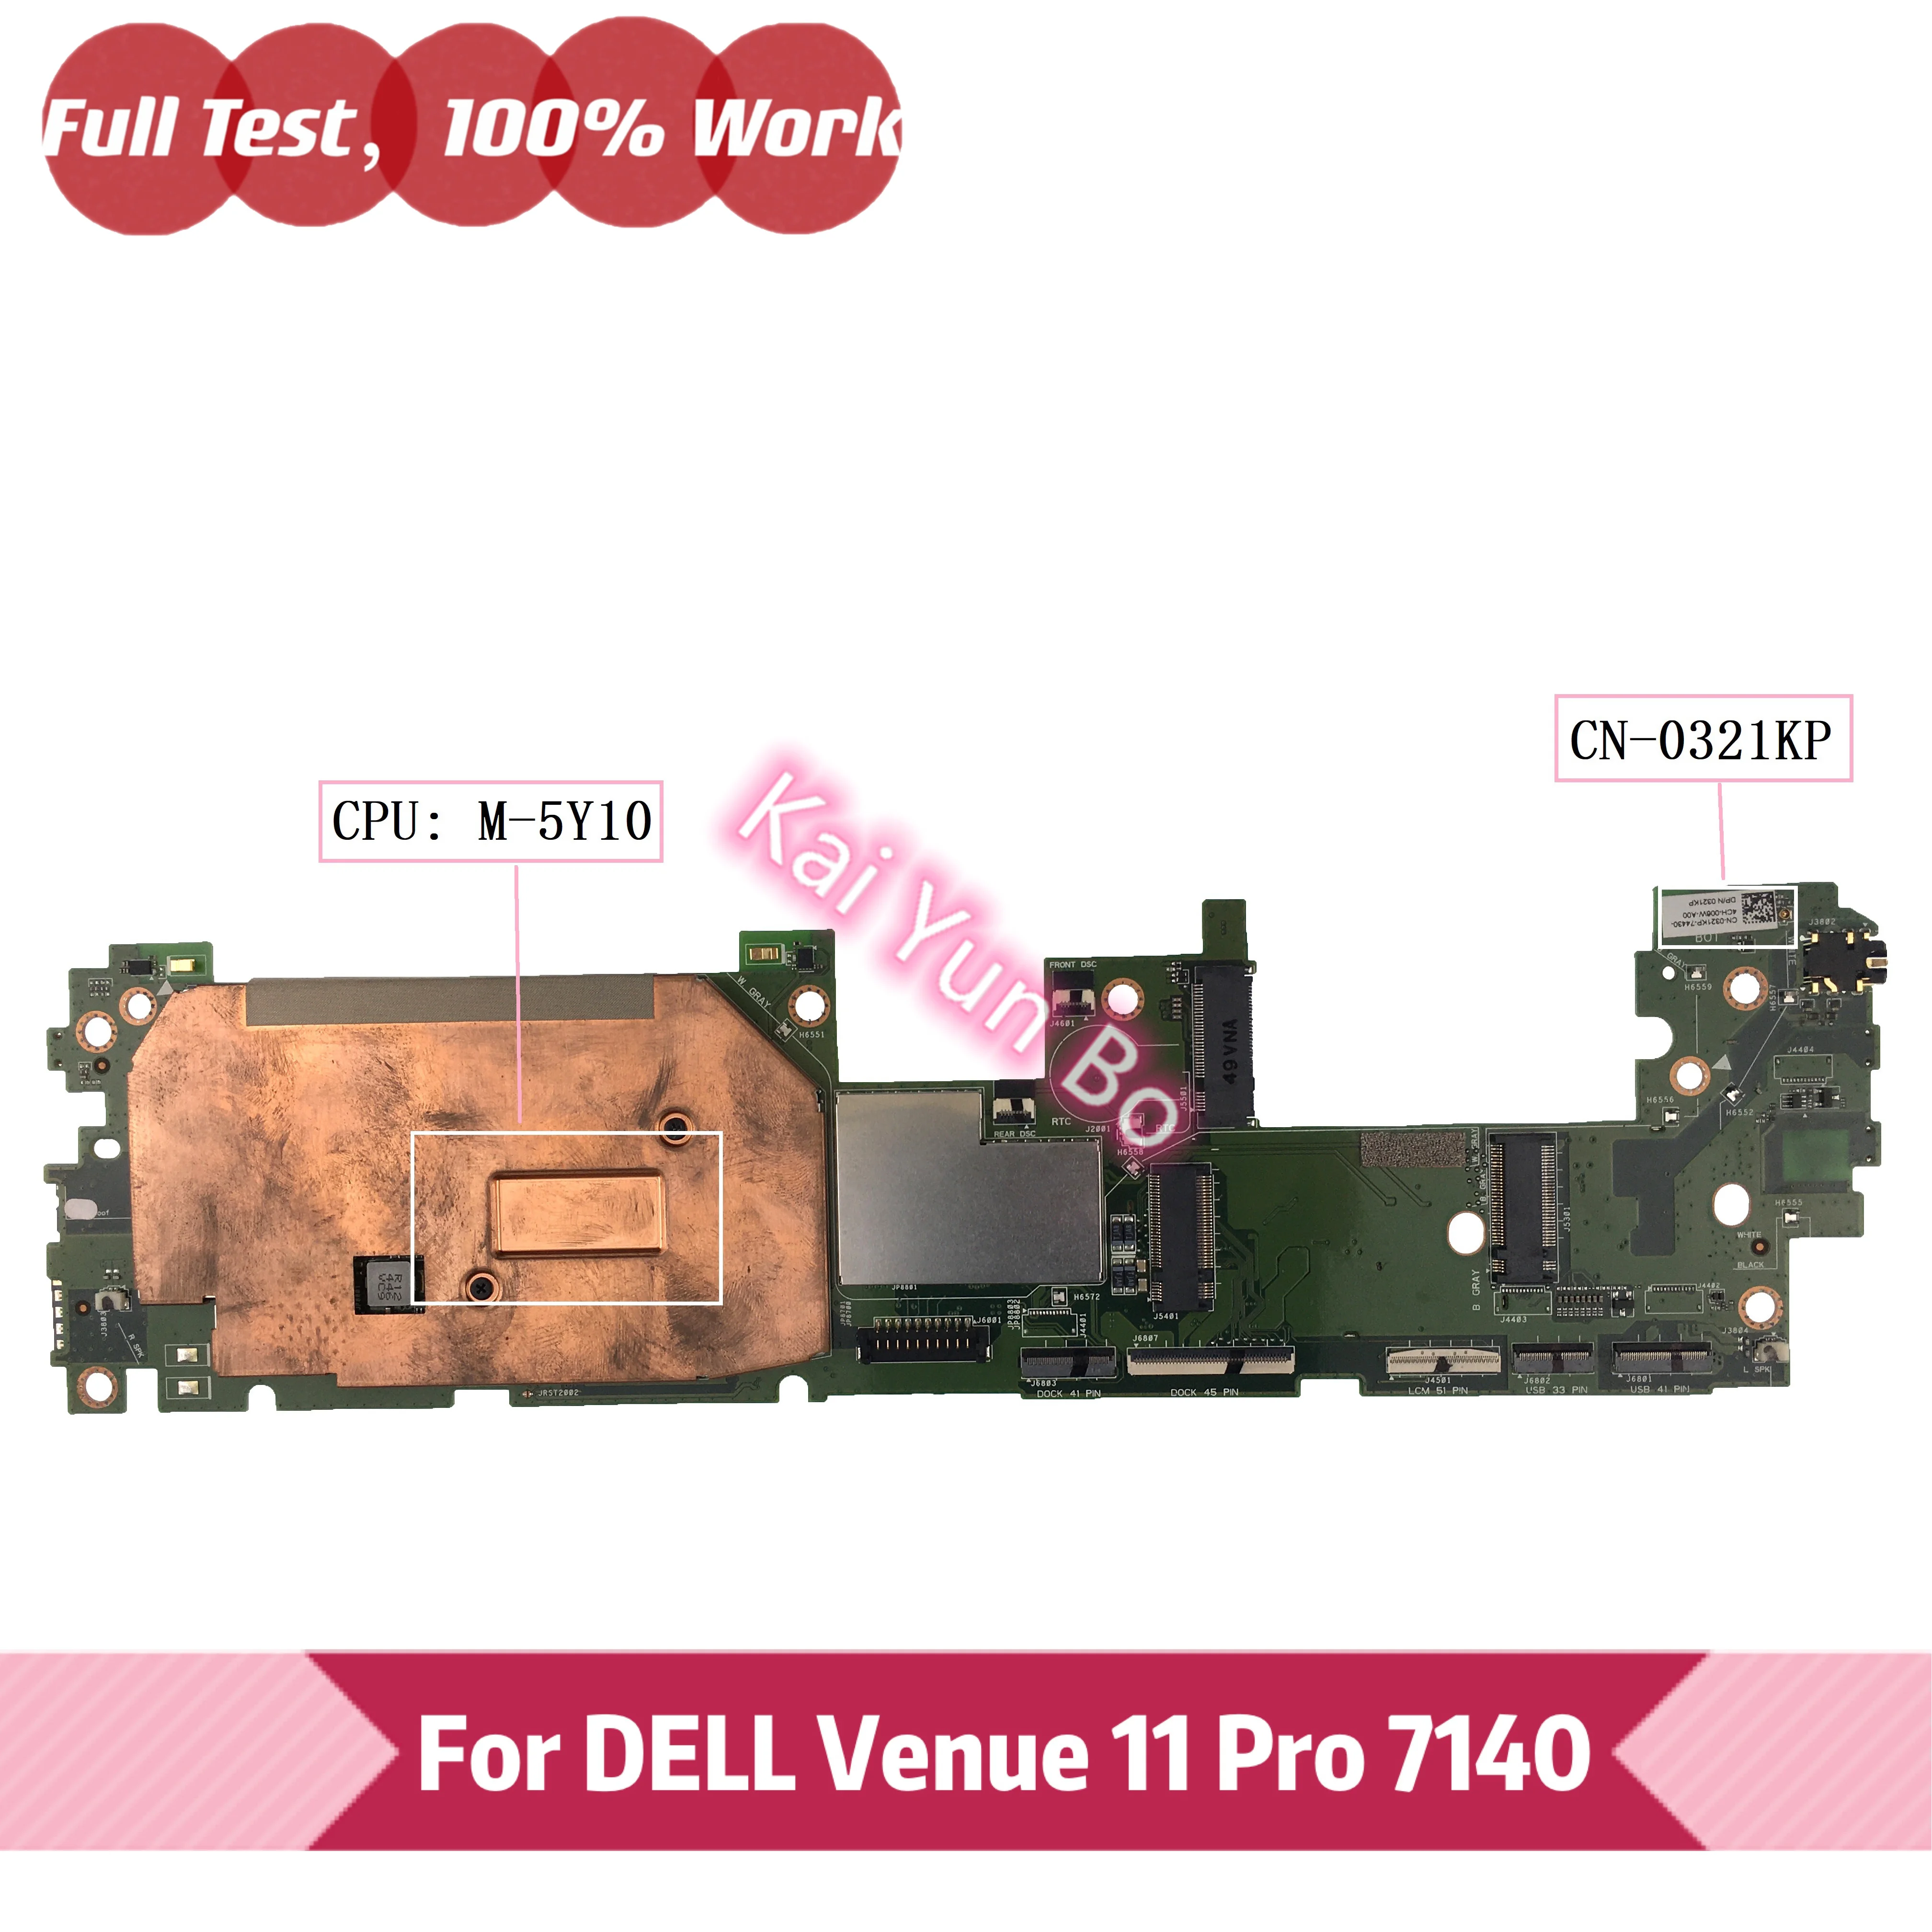 

CN-0321KP 0321KP 321KP Mainboard For DELL Venue 11 Pro 7140 Laptop Motherboard Notebook with M-5Y10 CPU 100% Tested OK